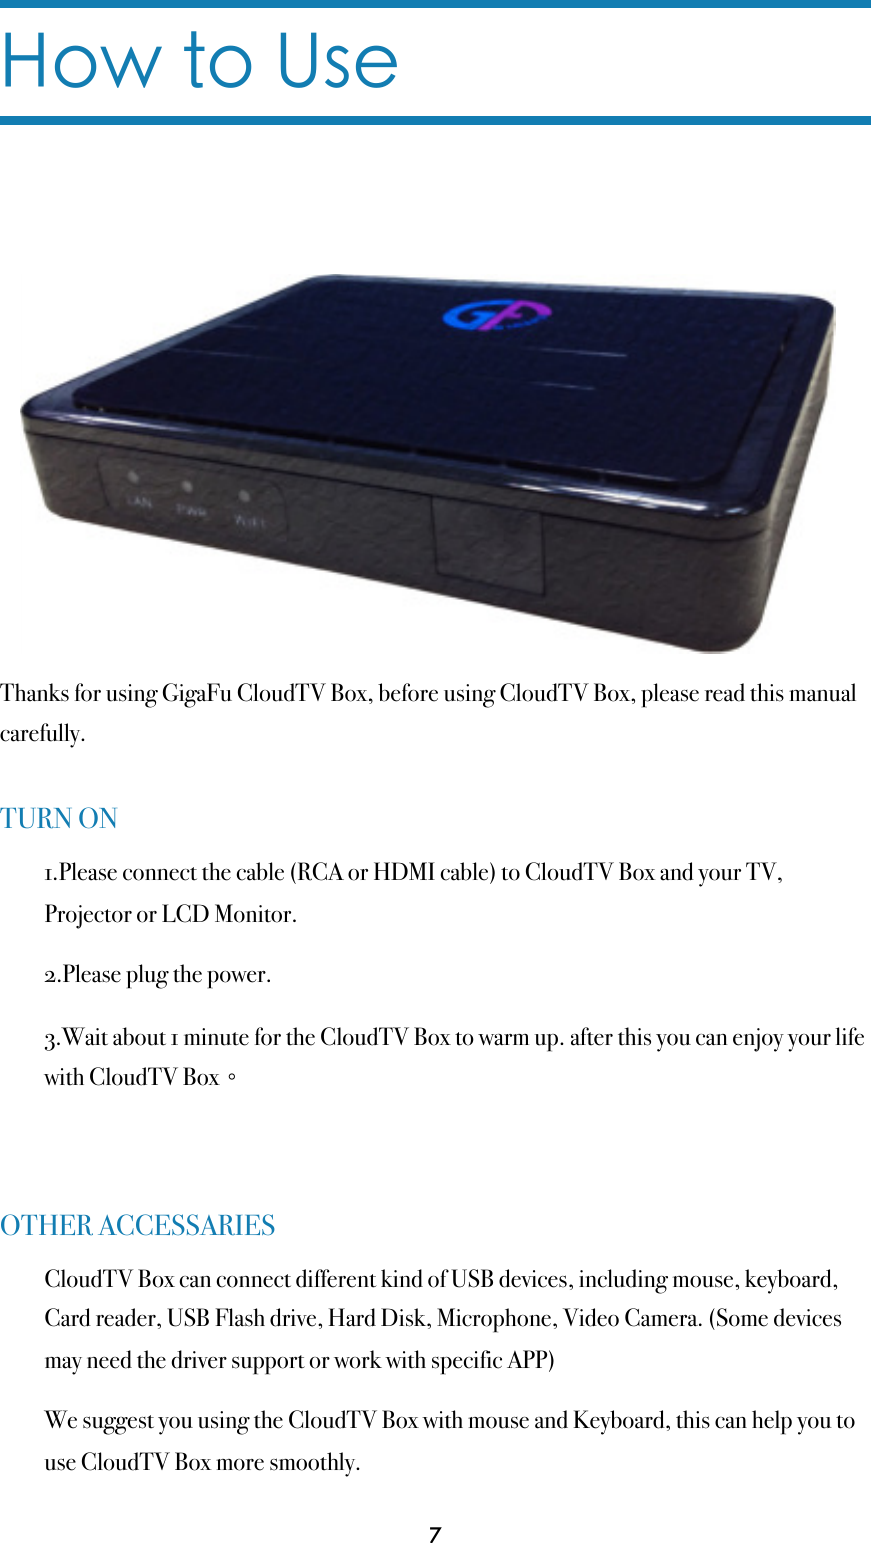 How to UseThanks for using GigaFu CloudTV Box, before using CloudTV Box, please read this manual carefully.TURN ON1.Please connect the cable (RCA or HDMI cable) to CloudTV Box and your TV, Projector or LCD Monitor.2.Please plug the power.3.Wait about 1 minute for the CloudTV Box to warm up. after this you can enjoy your life with CloudTV Box。OTHER ACCESSARIESCloudTV Box can connect different kind of USB devices, including mouse, keyboard, Card reader, USB Flash drive, Hard Disk, Microphone, Video Camera. (Some devices may need the driver support or work with specific APP)We suggest you using the CloudTV Box with mouse and Keyboard, this can help you to use CloudTV Box more smoothly.7